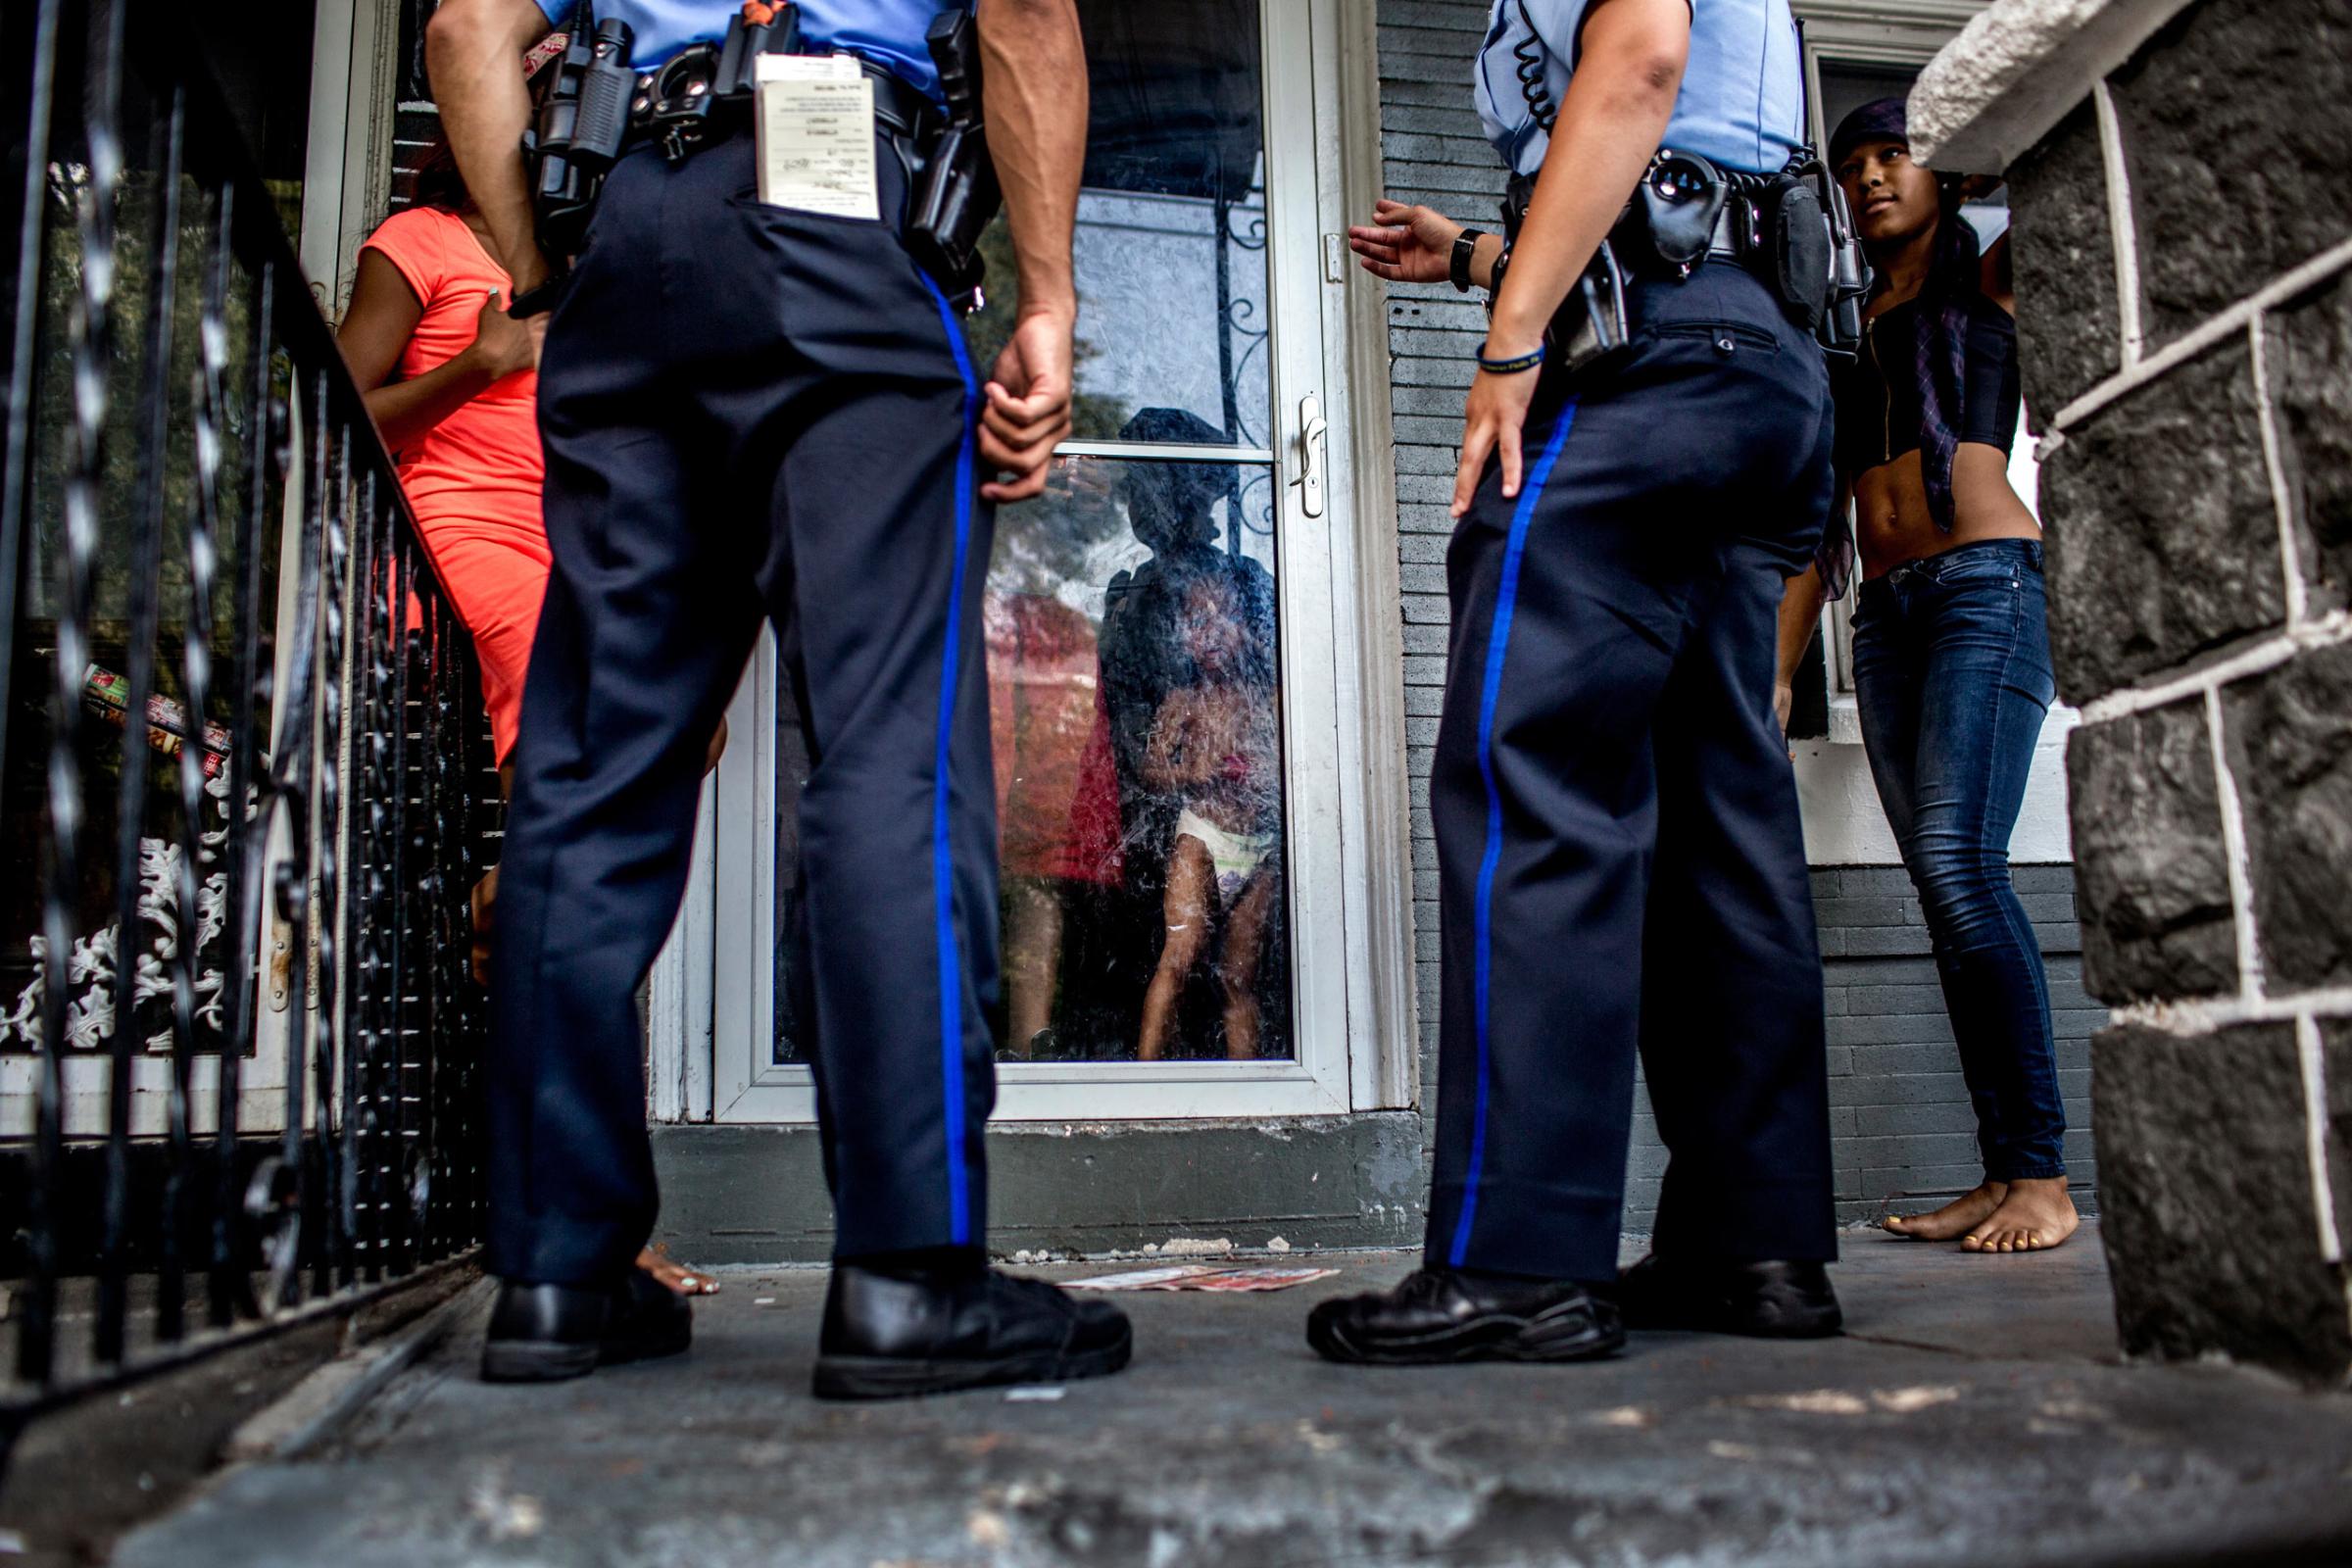 July 28th, 2015. Philadelphia, PA. Officers respond to a call regarding a young woman being threatened by an ex boyfriend. After asking a series of questions the police filed a domestic report. (Natalie Keyssar)